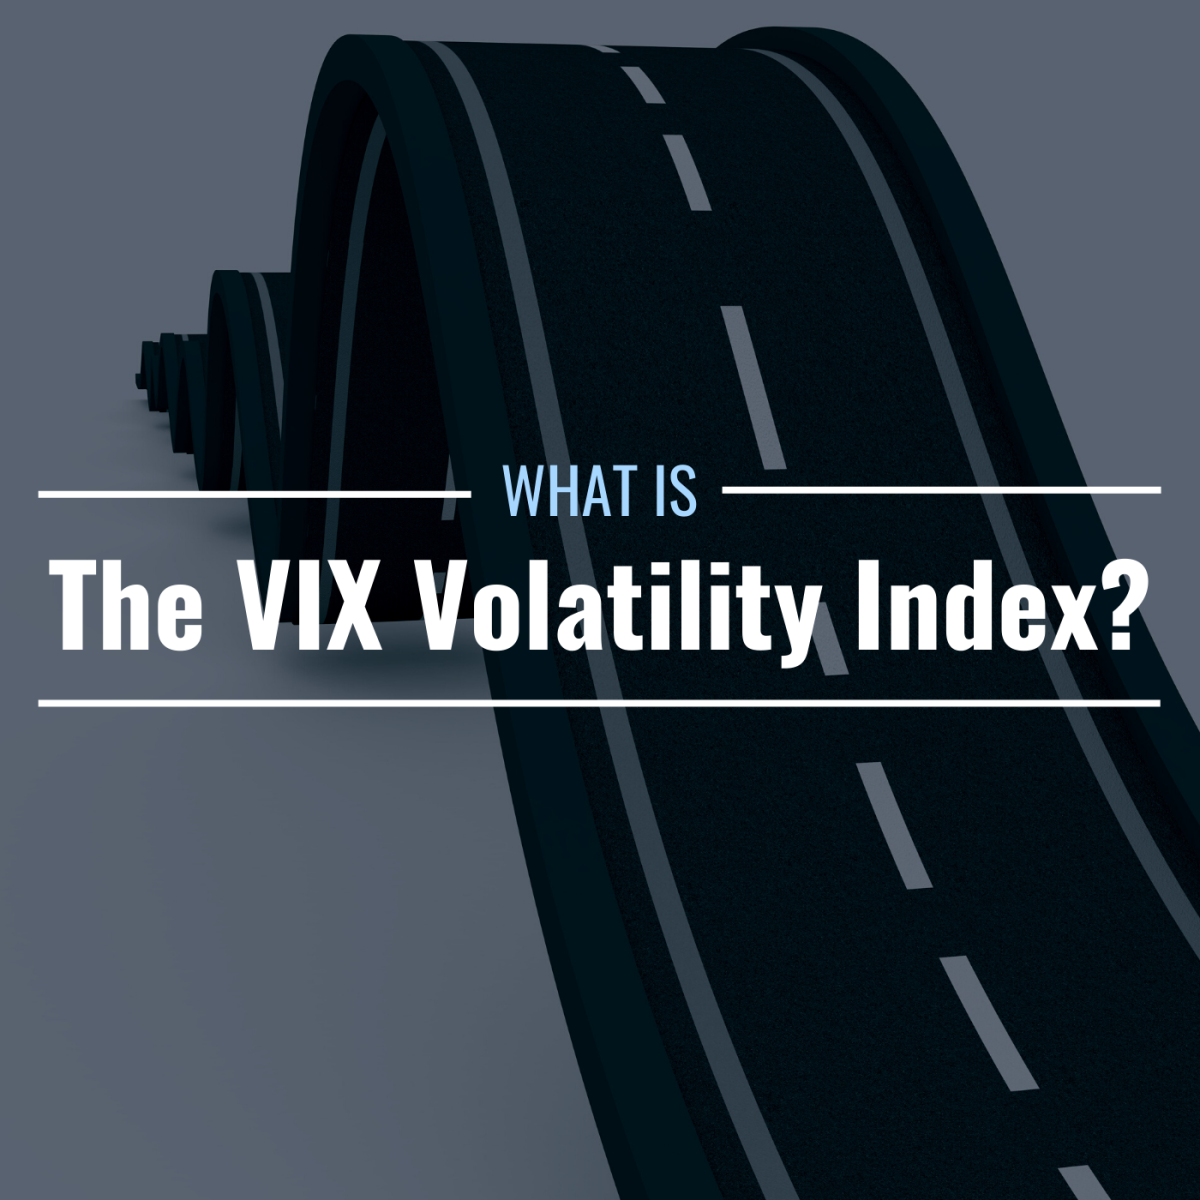 Image of a bumpy road with text overlay "What Is the VIX Volatility Index?"